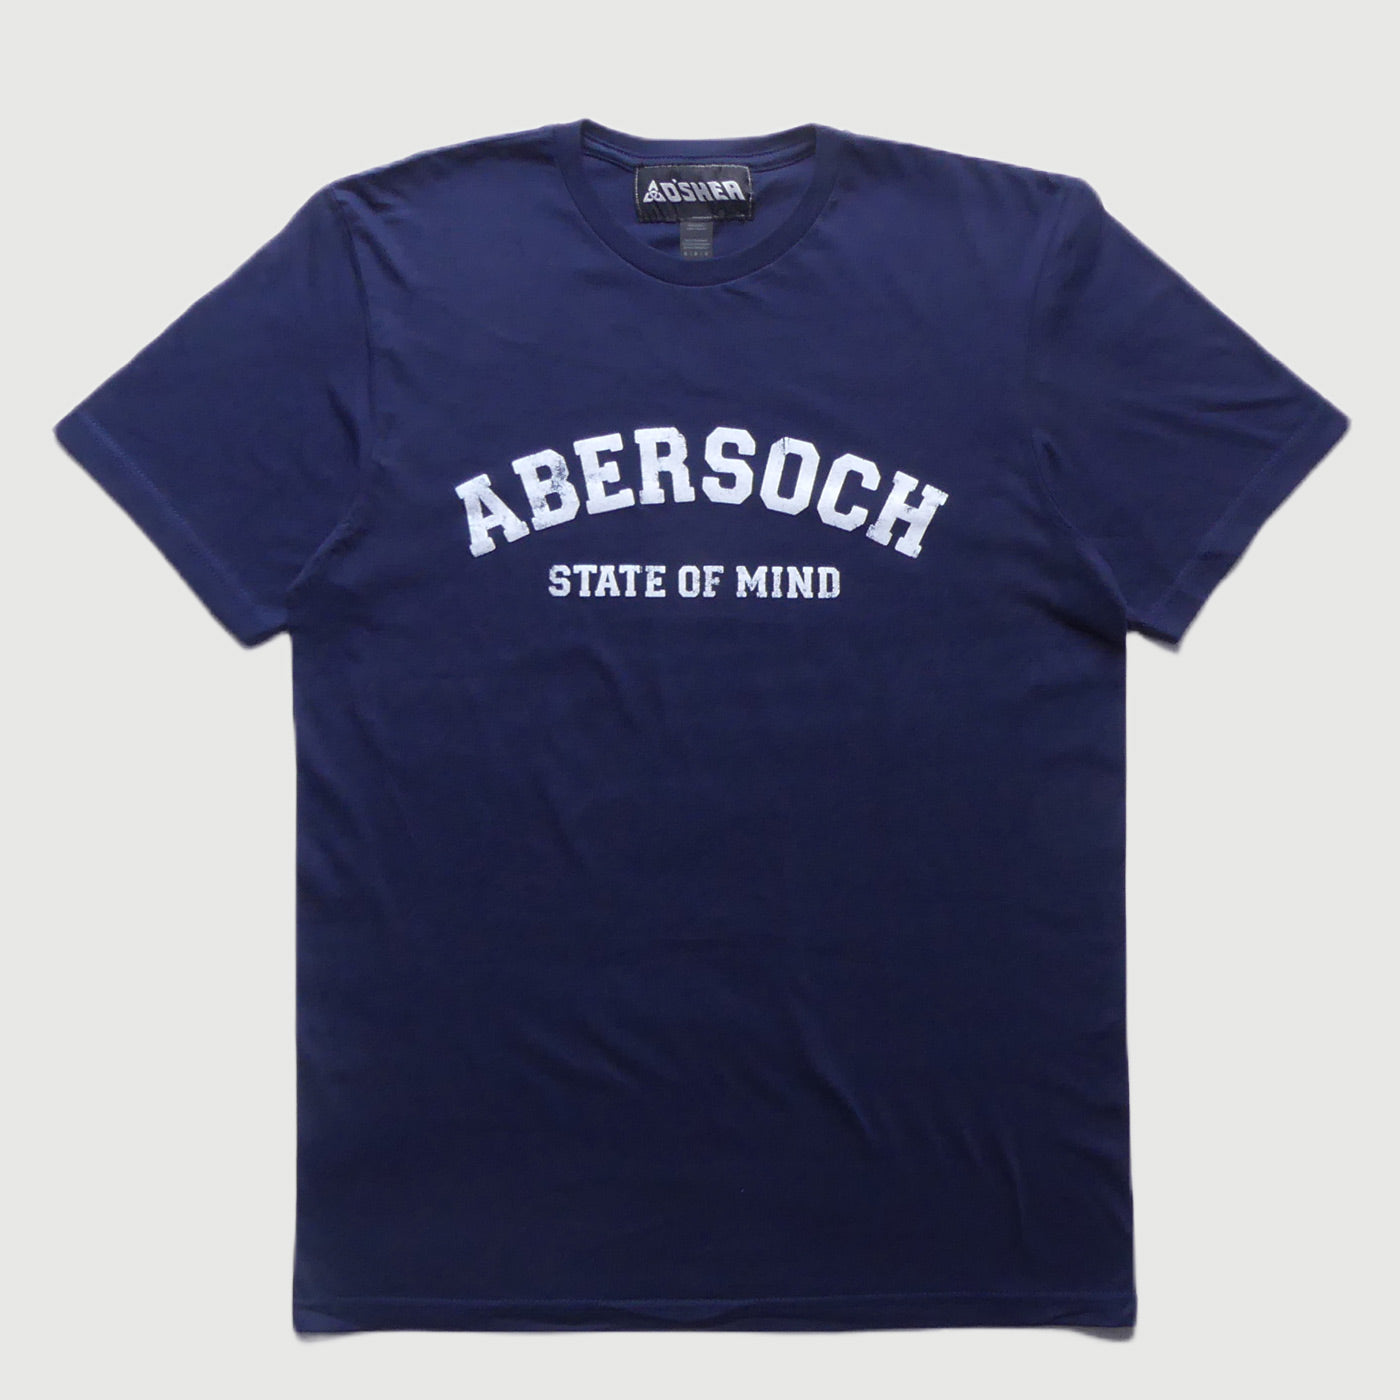 O'SHEA ABERSOCH MENS "STATE OF MIND" TEE - NAVY